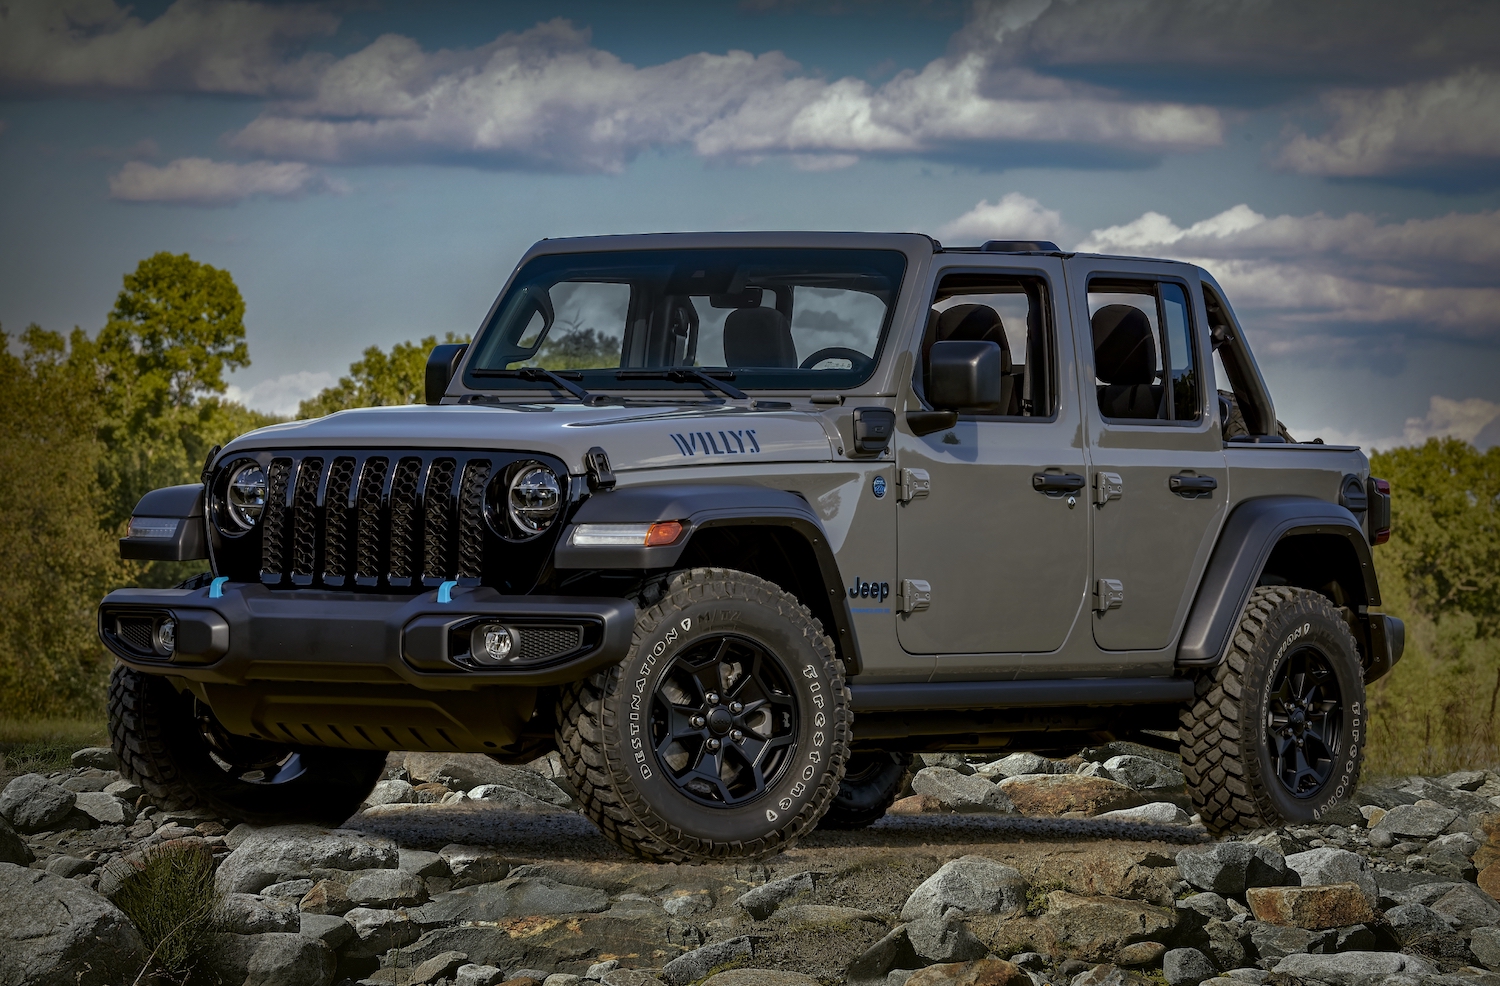 A gray Jeep Wrangler "Willys" edition hybrid 4xe parked on a pile of rocks for a promo photo, trees visible in the background.